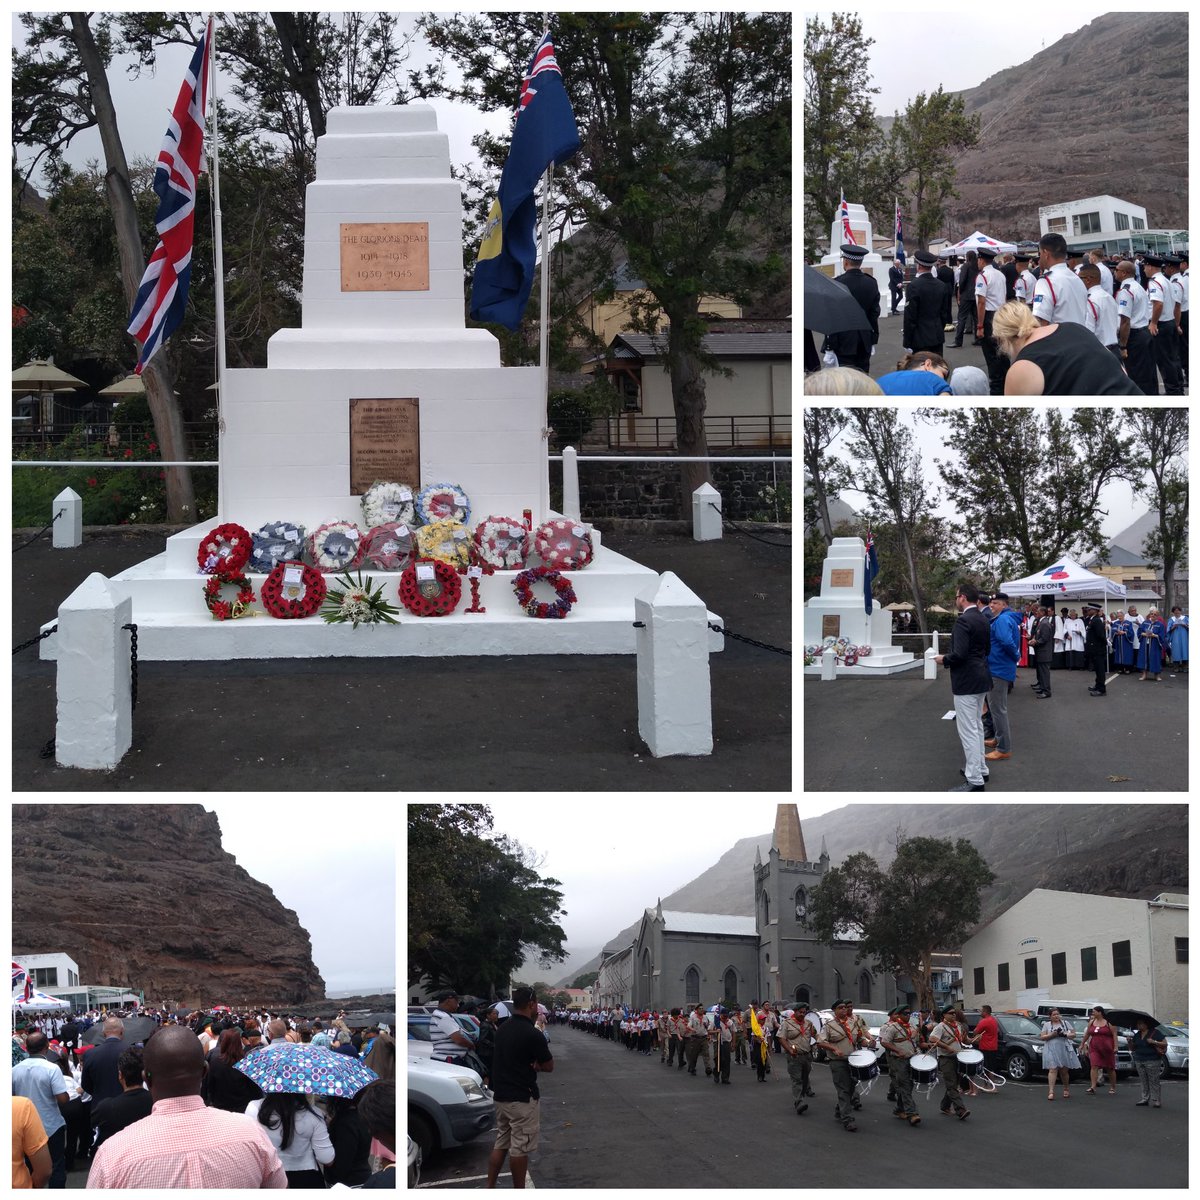 Grateful to have been able to attend the #RemembranceDay service on #StHelena this morning. A wreath was also laid by divers on the wreck of the RFA Darkdale. #WeWillRememberThem